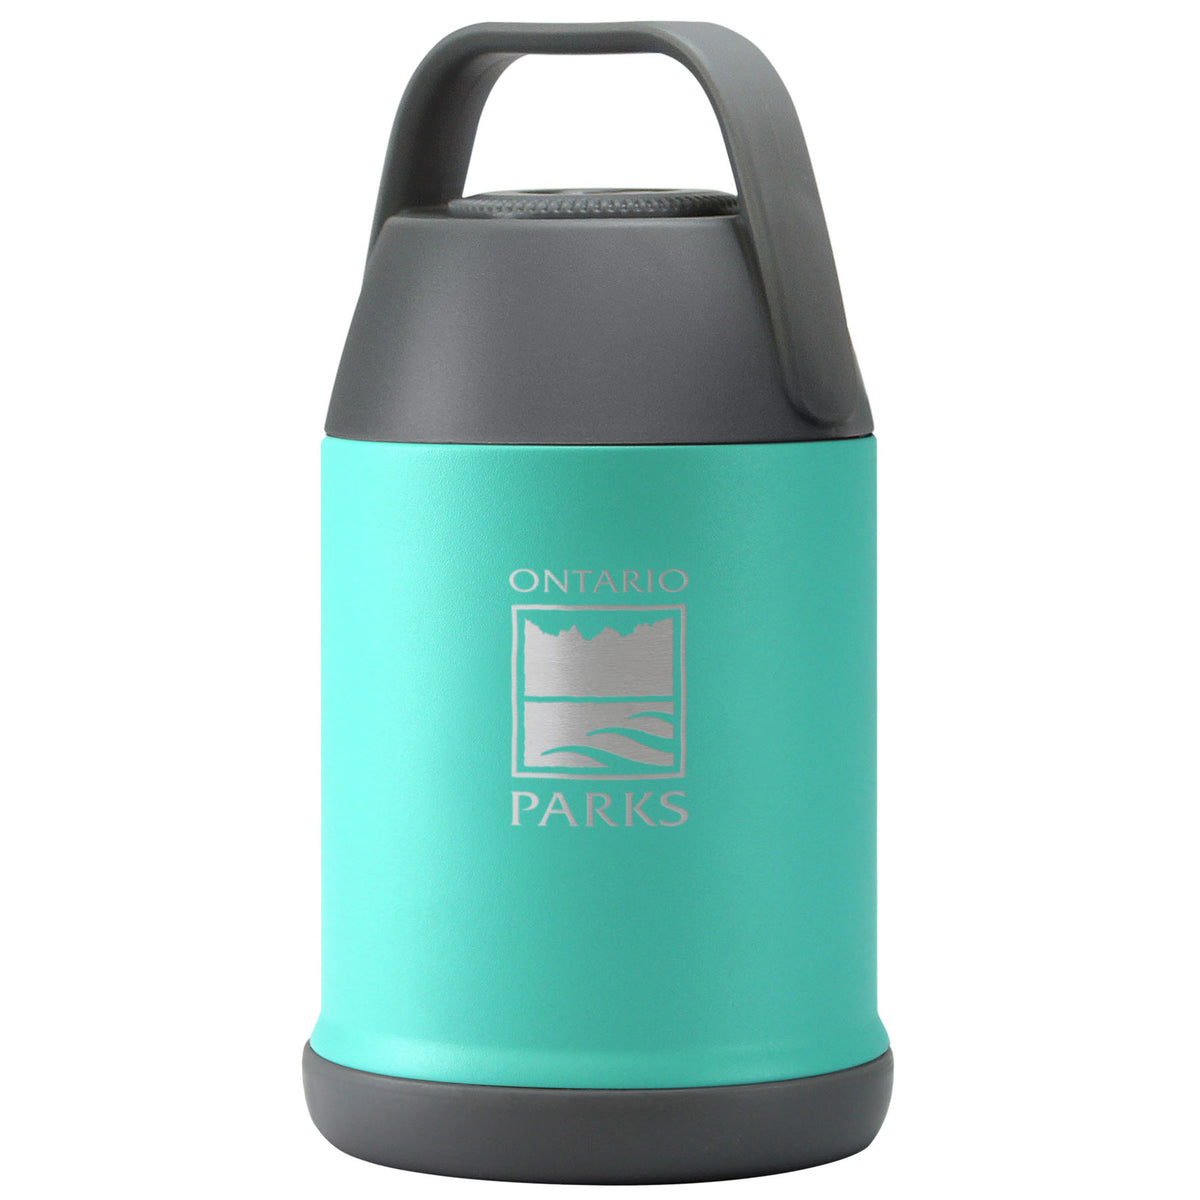 Teal blue (colour name Southampton) 16 Oz Chilly Moose thermos, with etched Ontario Parks logo on front. Black base and handle.